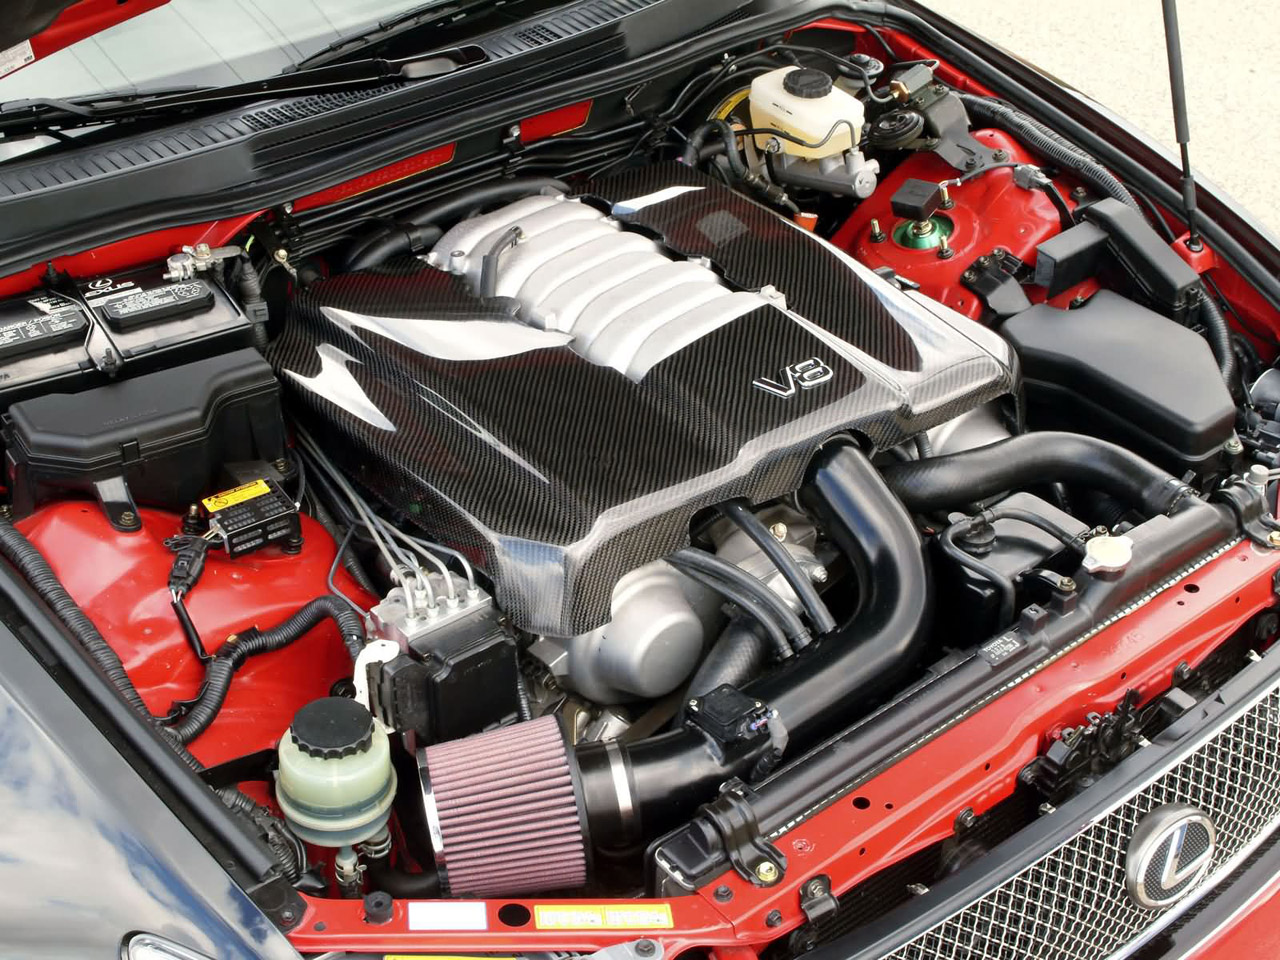 Lexus IS 430 V8 engine from the side